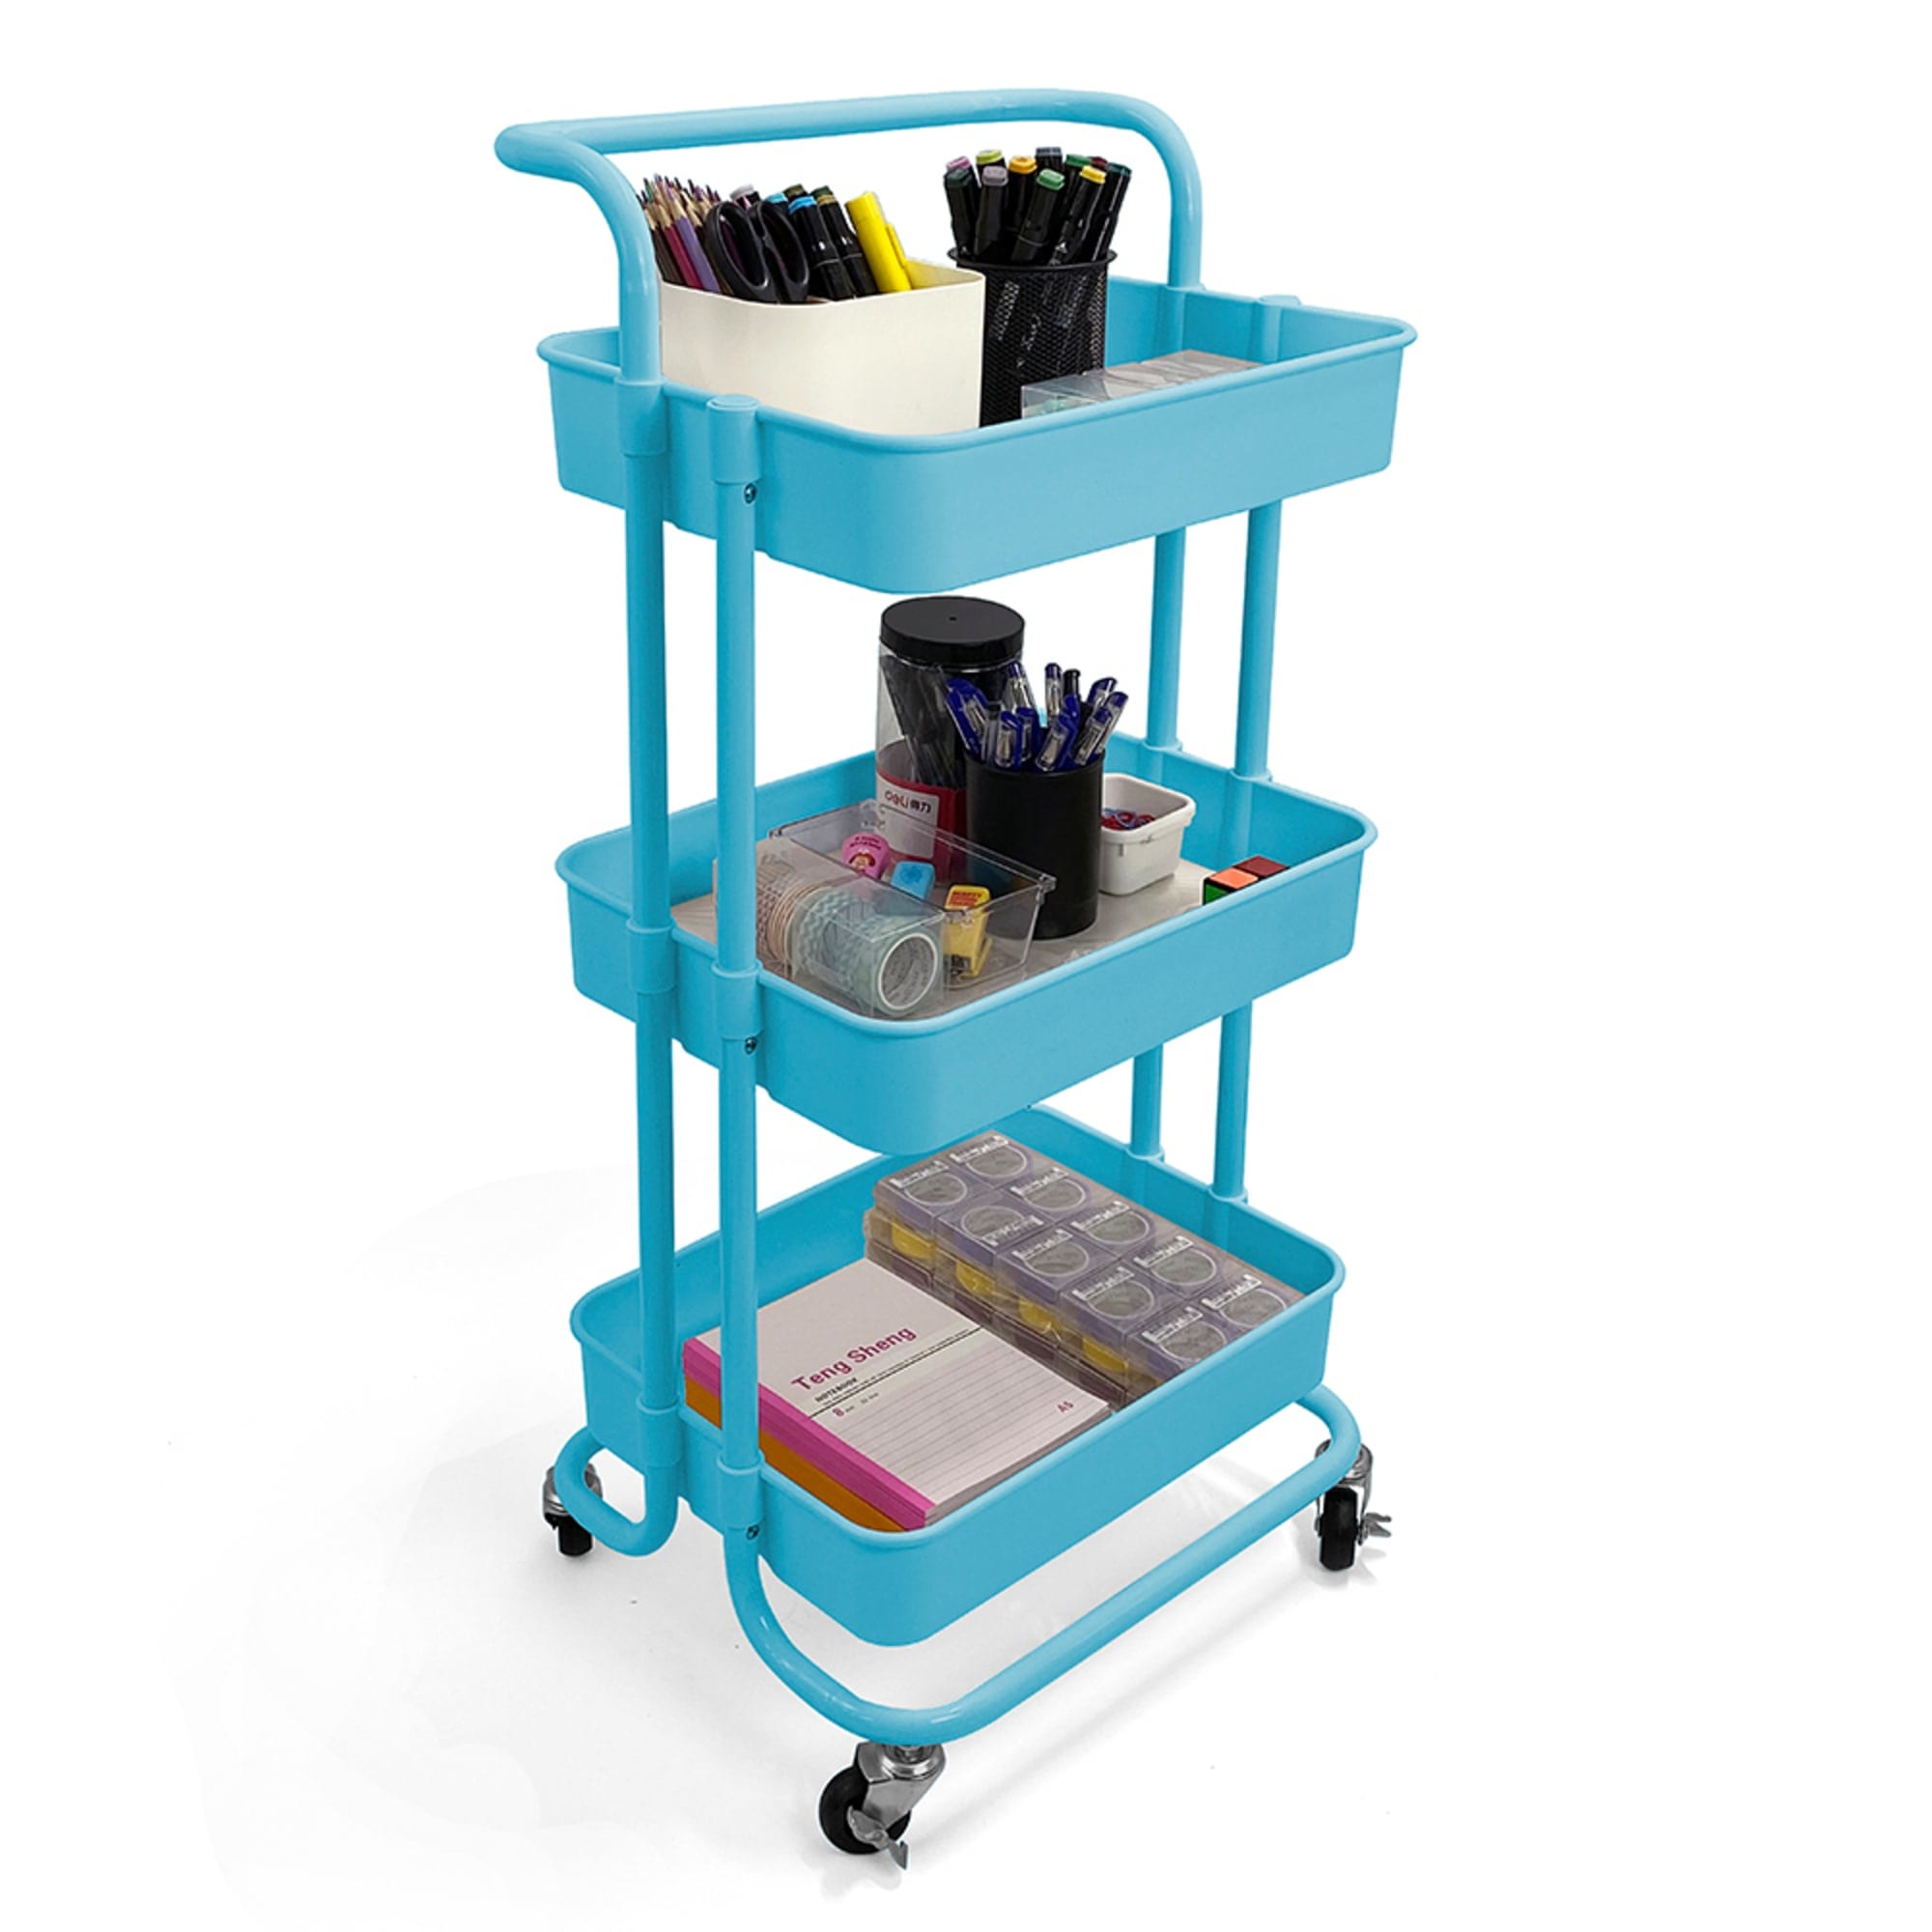 Home Basics 3 Tier Steel Rolling Utility Cart with 2 Locking Wheels, Blue $30 EACH, CASE PACK OF 3